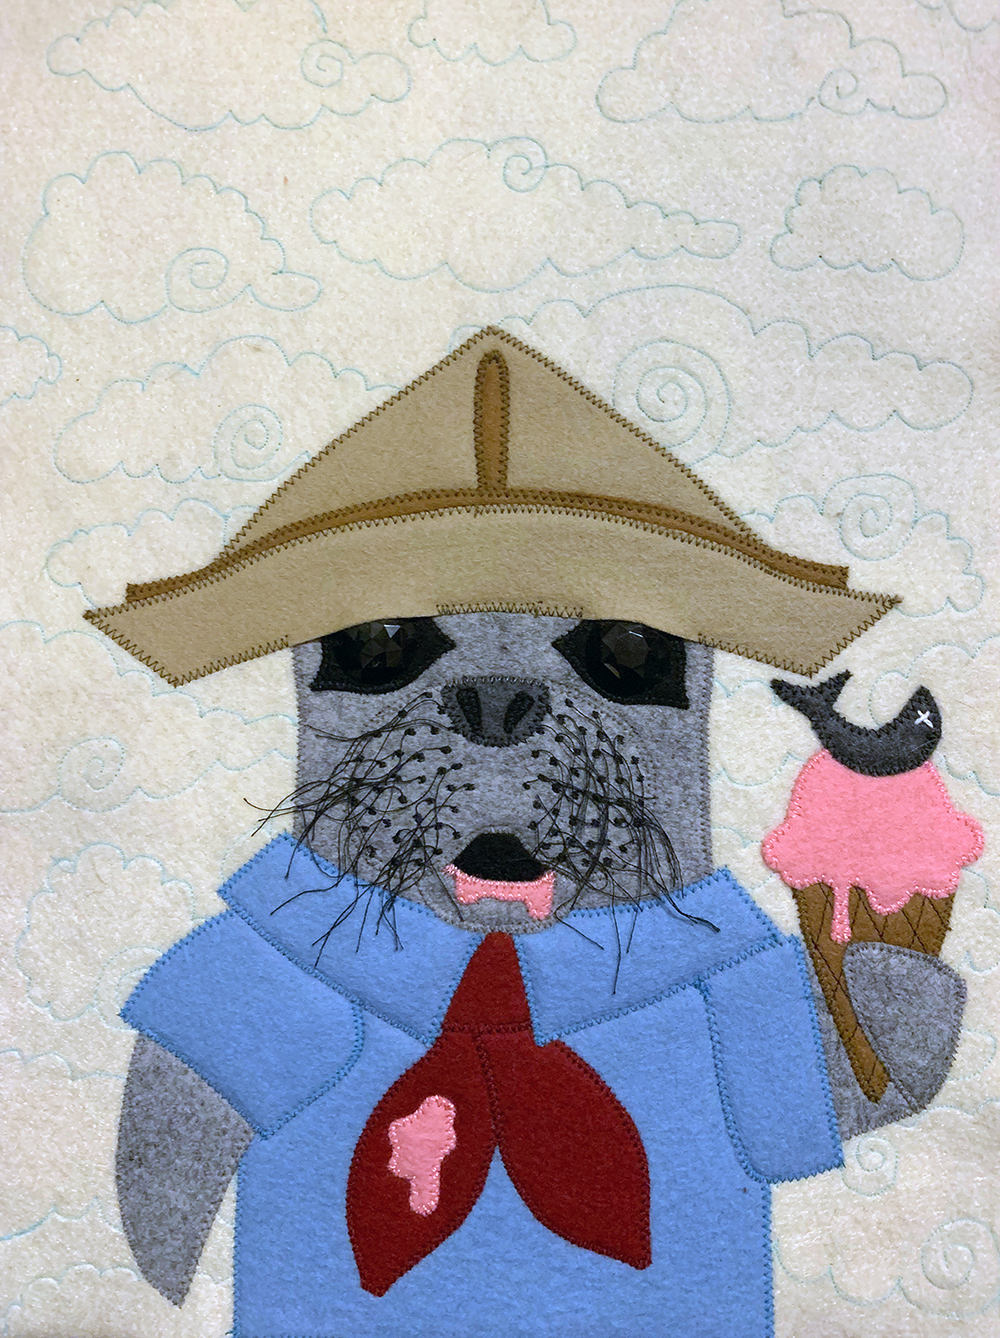 felt portrait of a seal with an ice cream cone